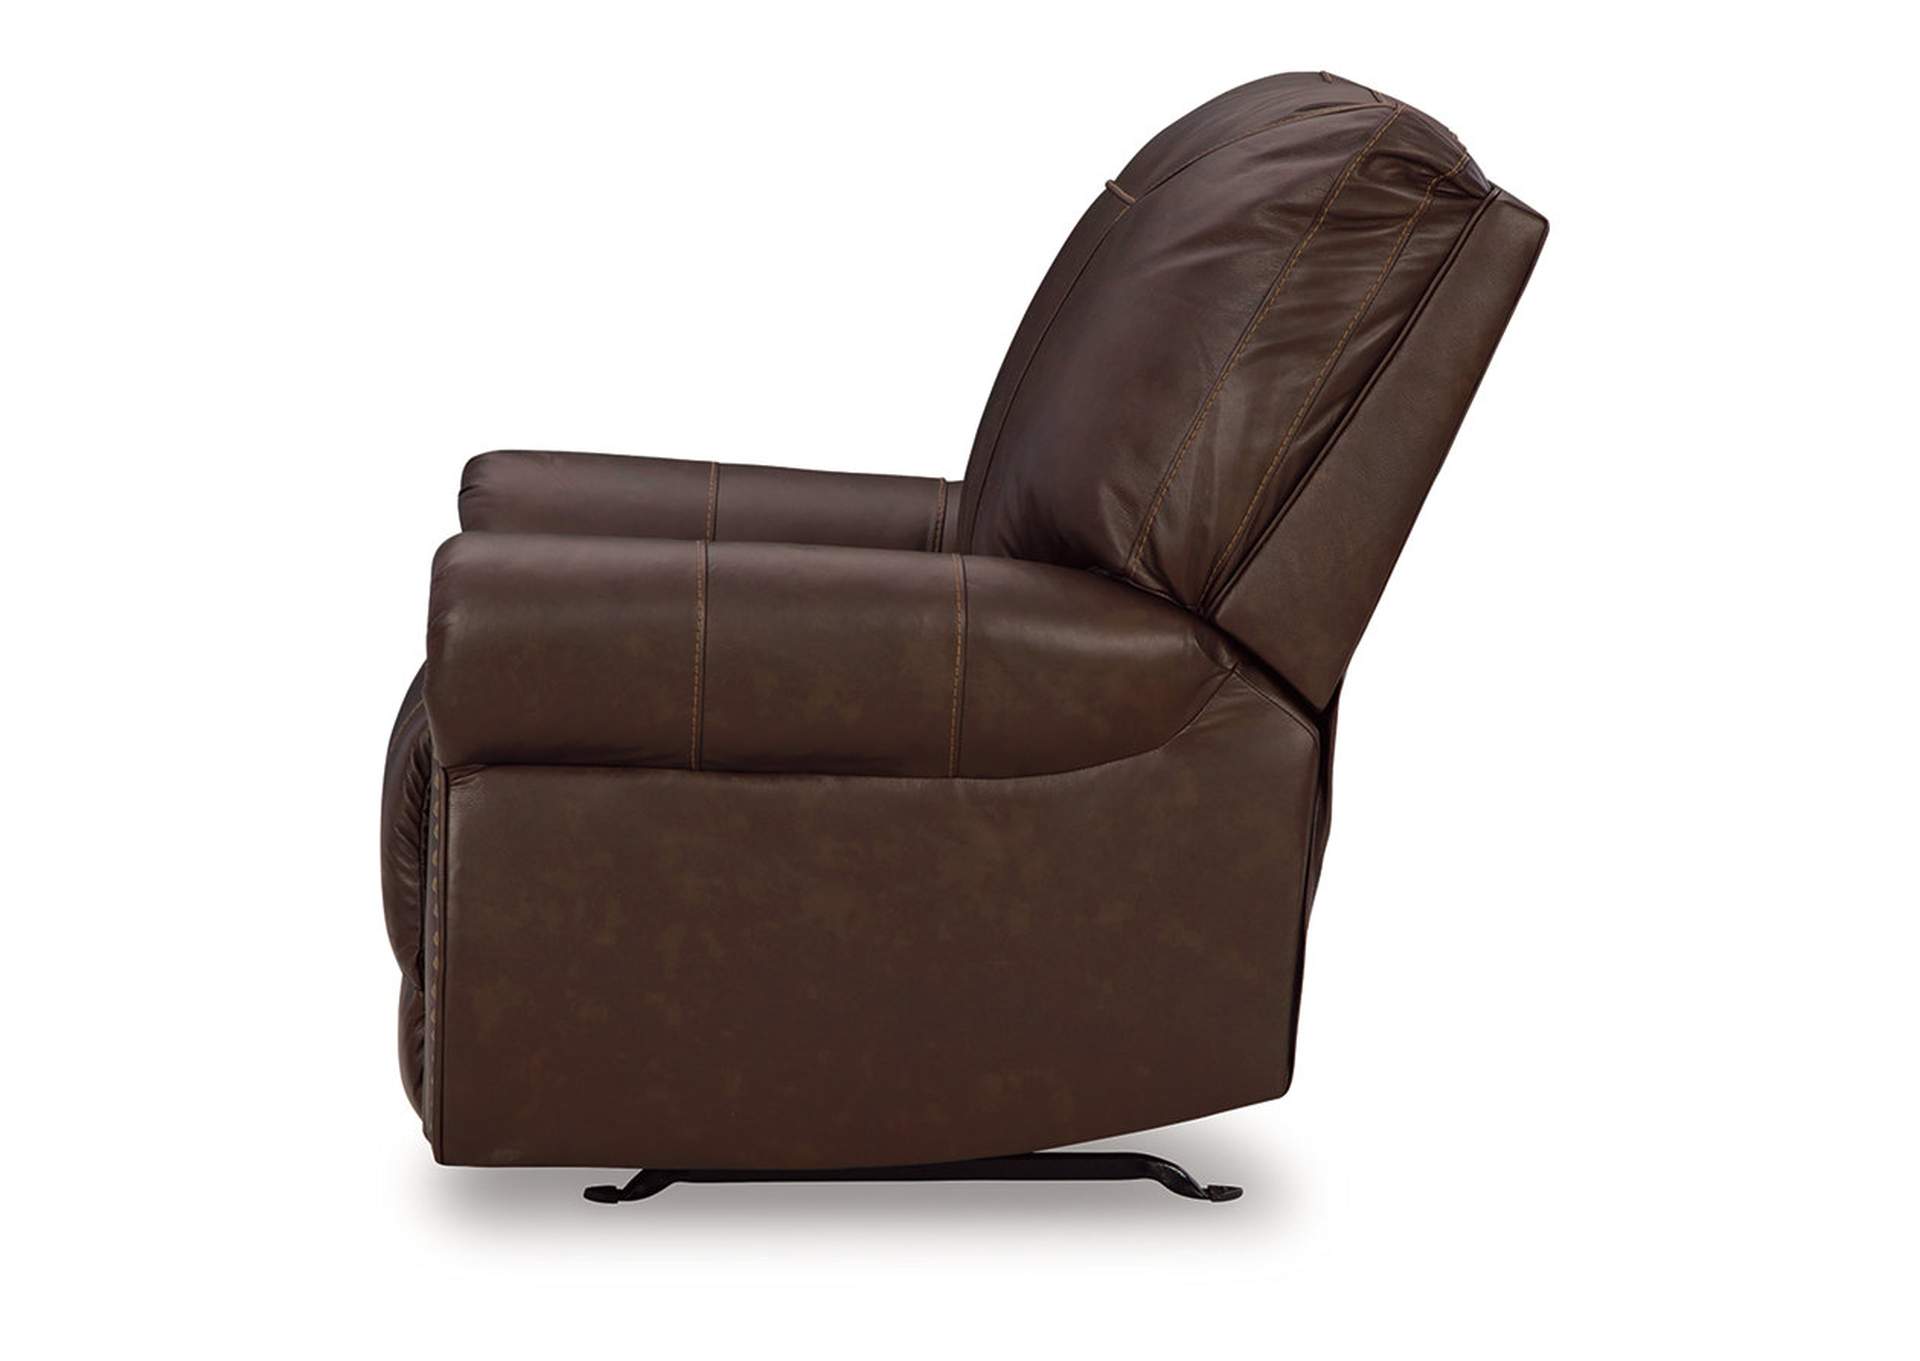 Colleton Recliner,Signature Design By Ashley